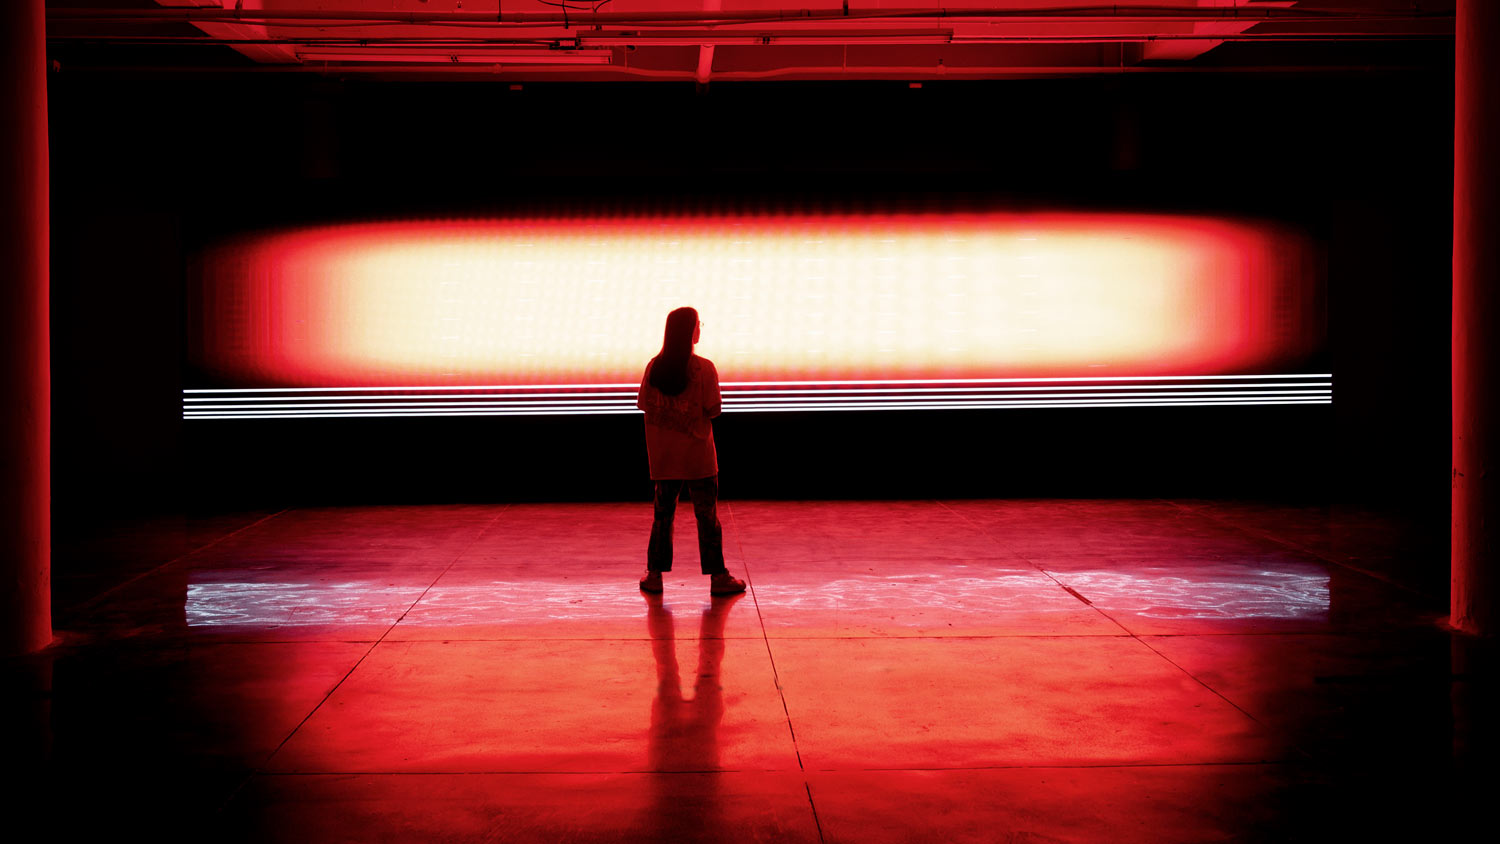 A woman stand with back to the viewer in front of a strip of red light in a dark theater.  